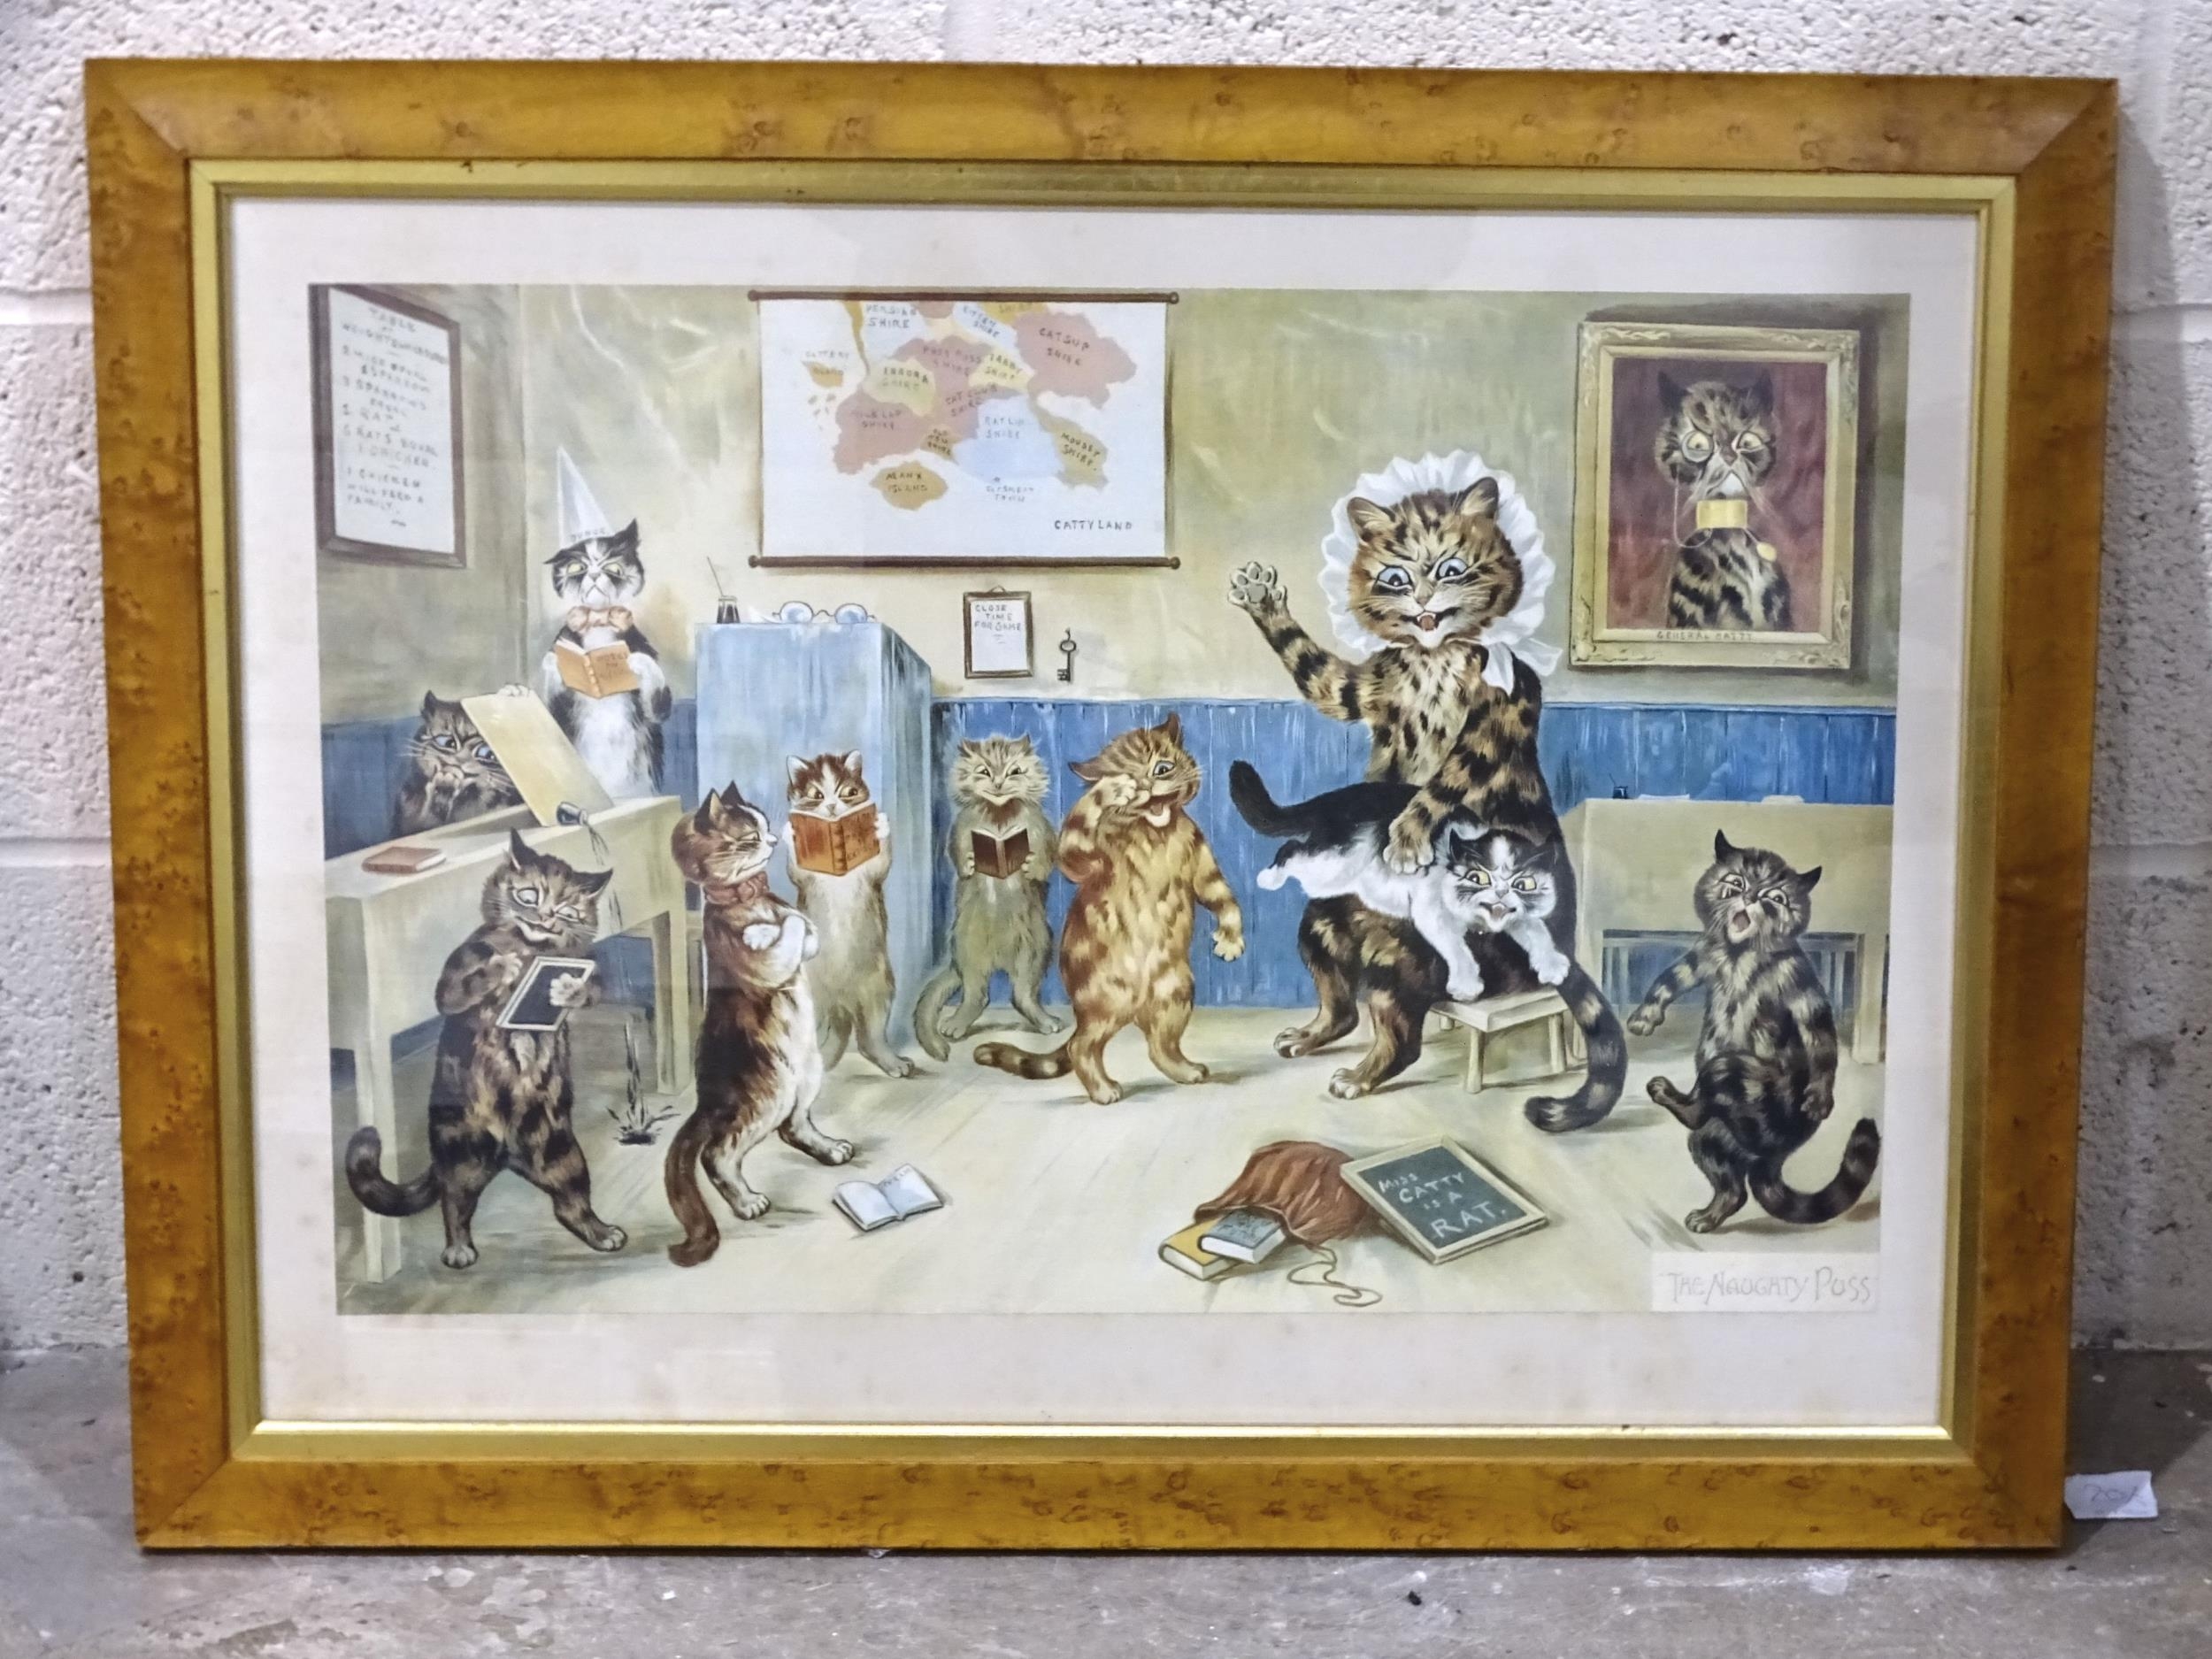 A coloured lithographic print after Louis Wain, "The Naughty Puss", in maple frame, image 40 x 61cm, - Image 2 of 3